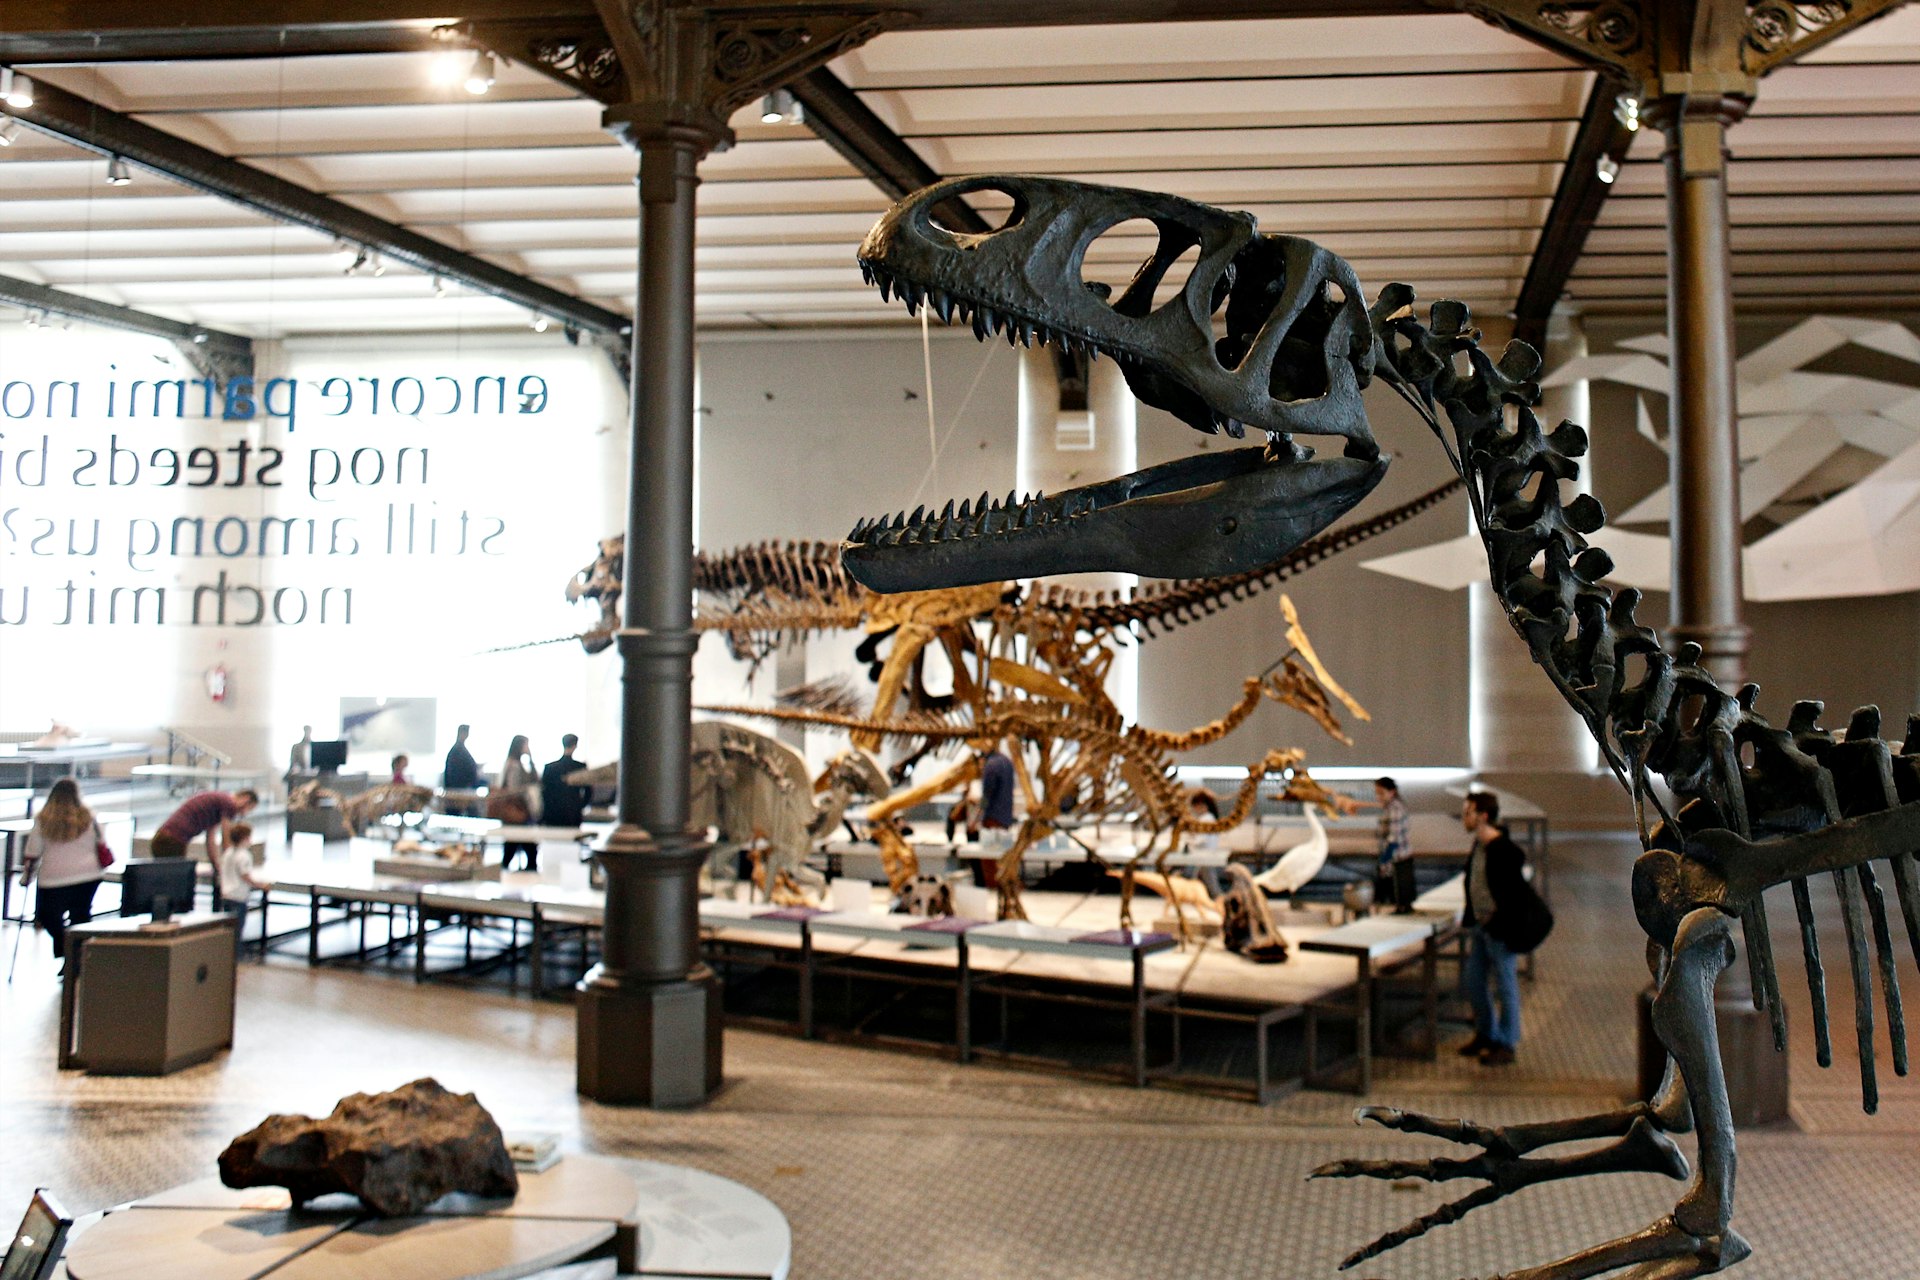 A dinosaur fossil inside the Museum of Natural Sciences in Brussels, Belgium